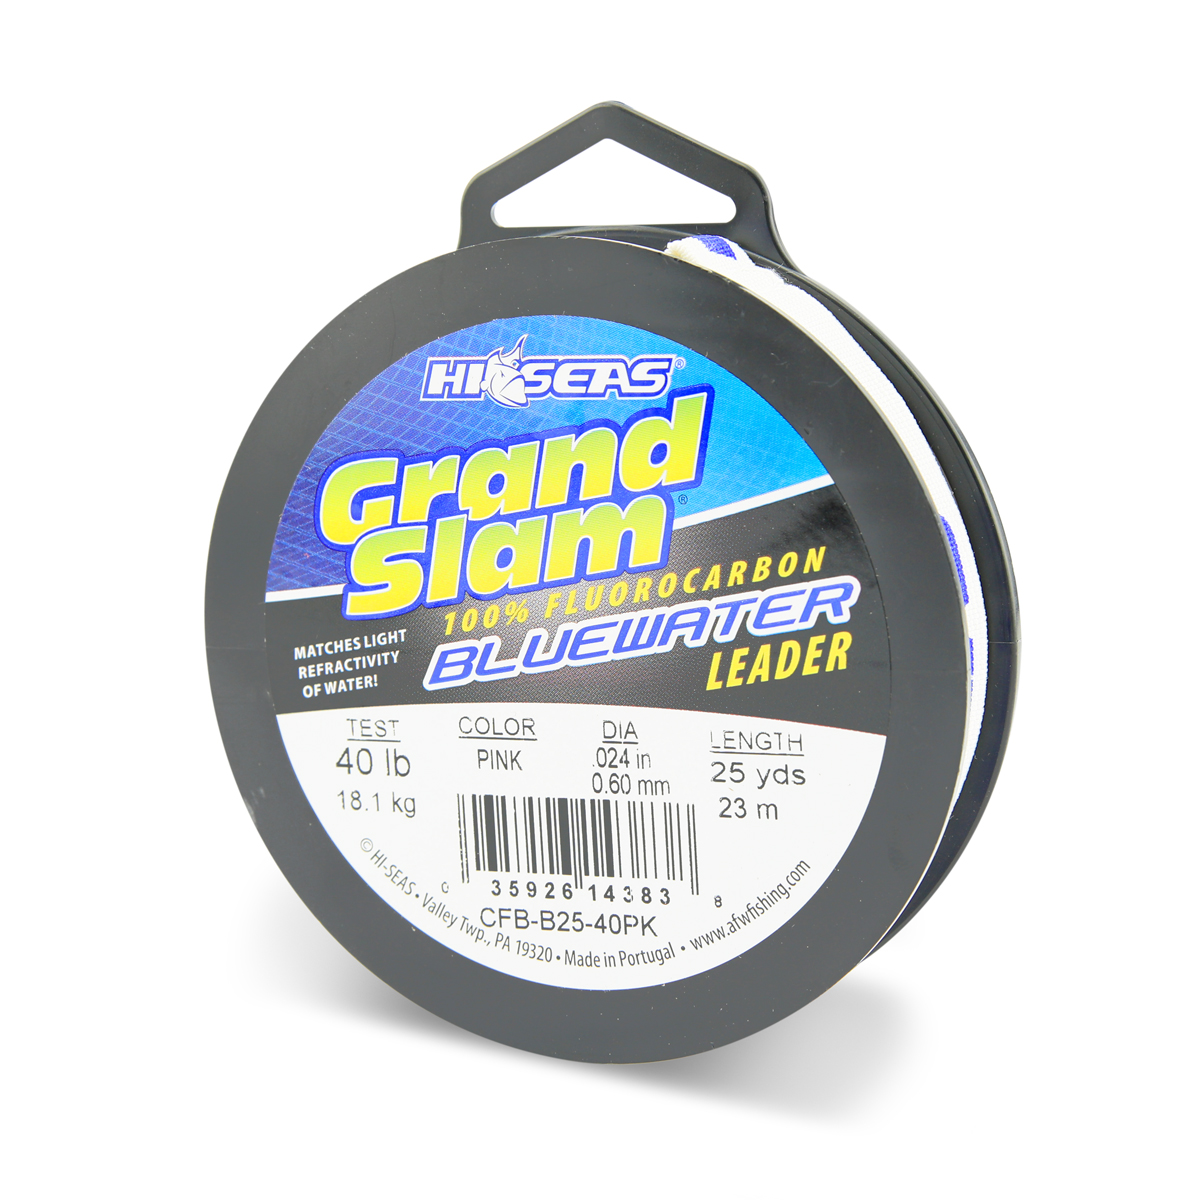 Grand Slam Bluewater 100% Fluorocarbon Leader, 40 lb (18.1 kg) test, .024  in (0.60 mm) dia, Pink, 25 yd (23 m) Spool